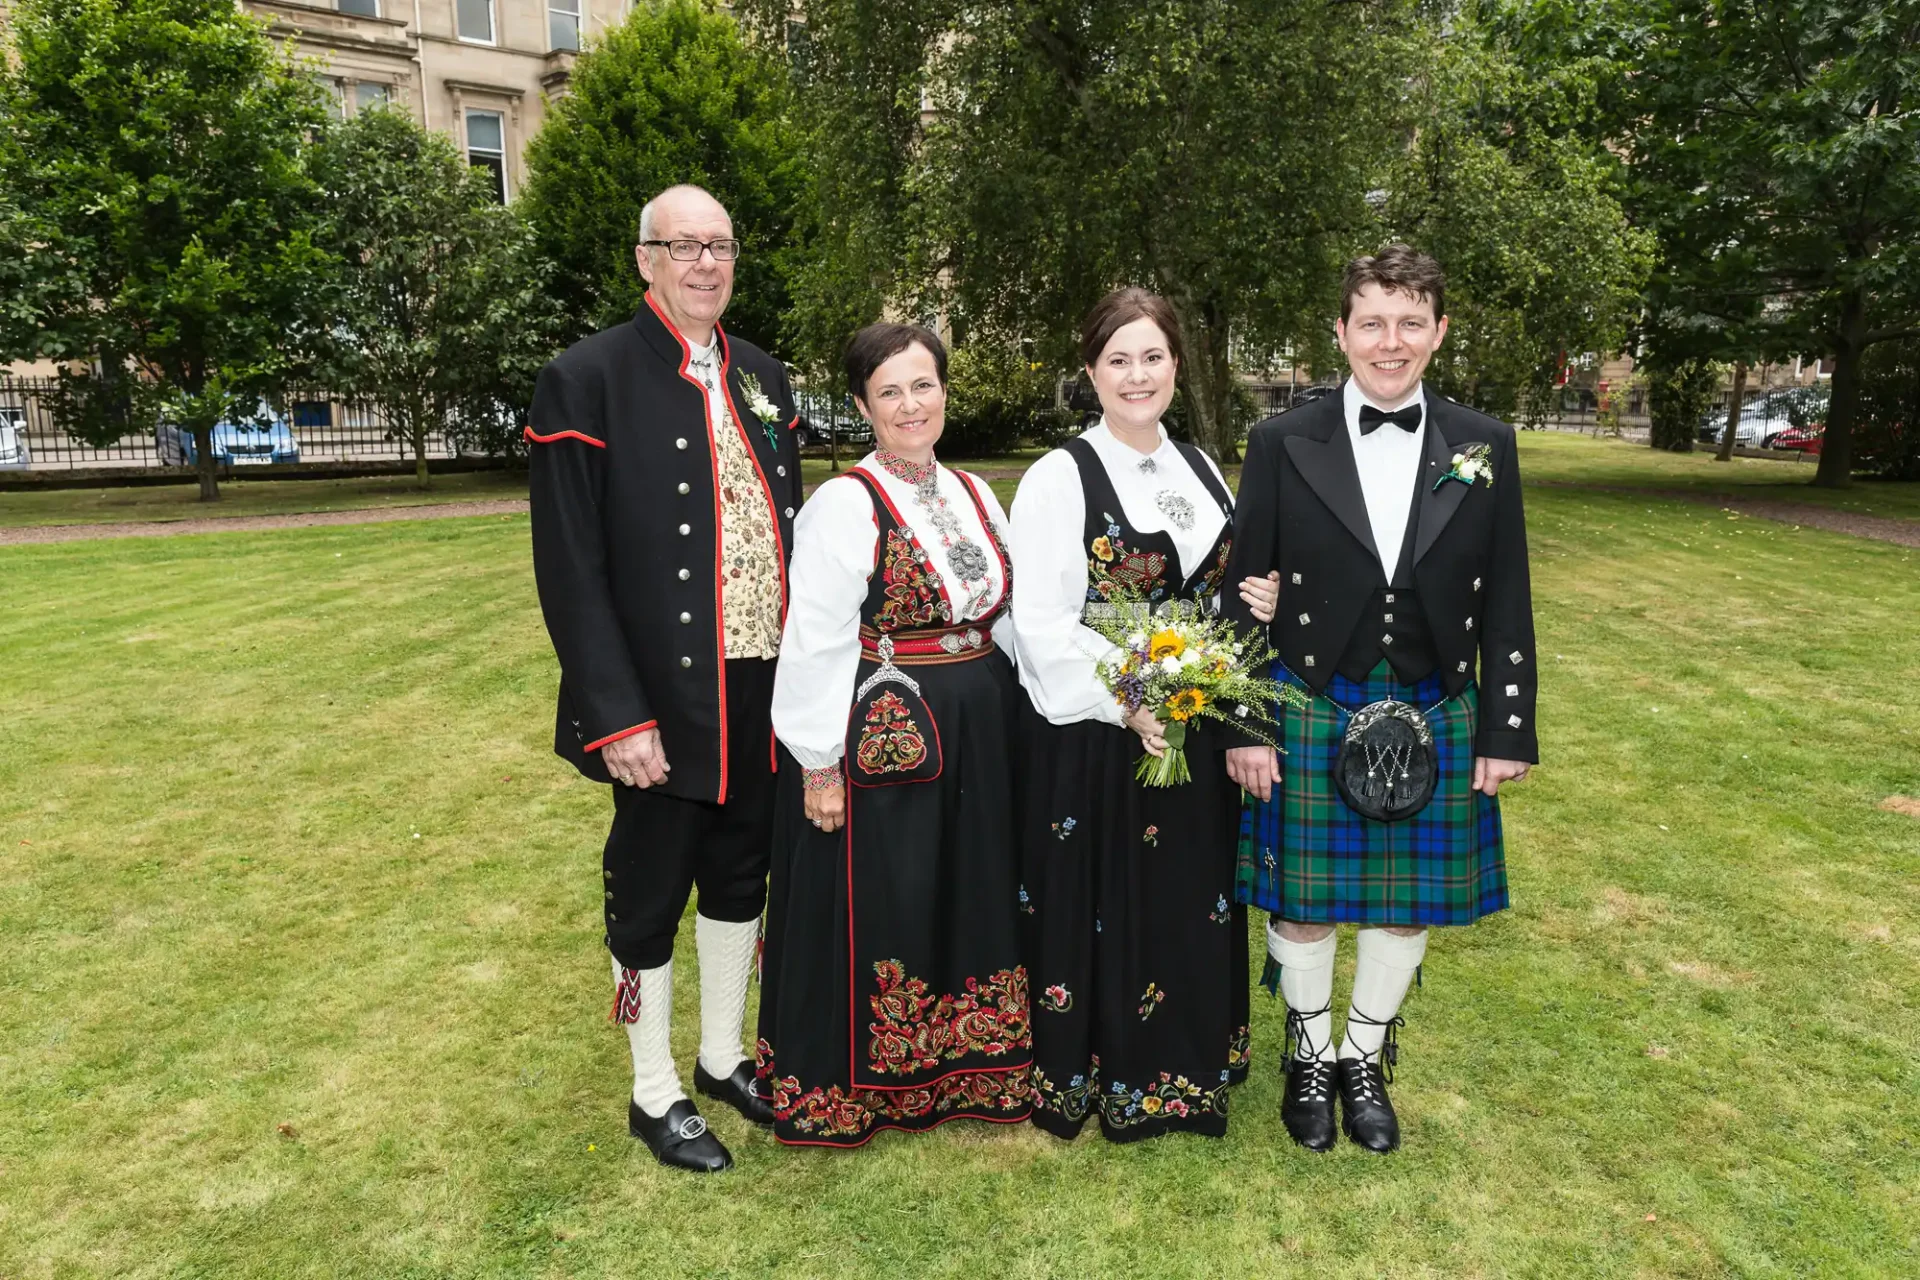 Two couples in traditional attire, one in a kilt and the other in norwegian dress, posing together in a green park.